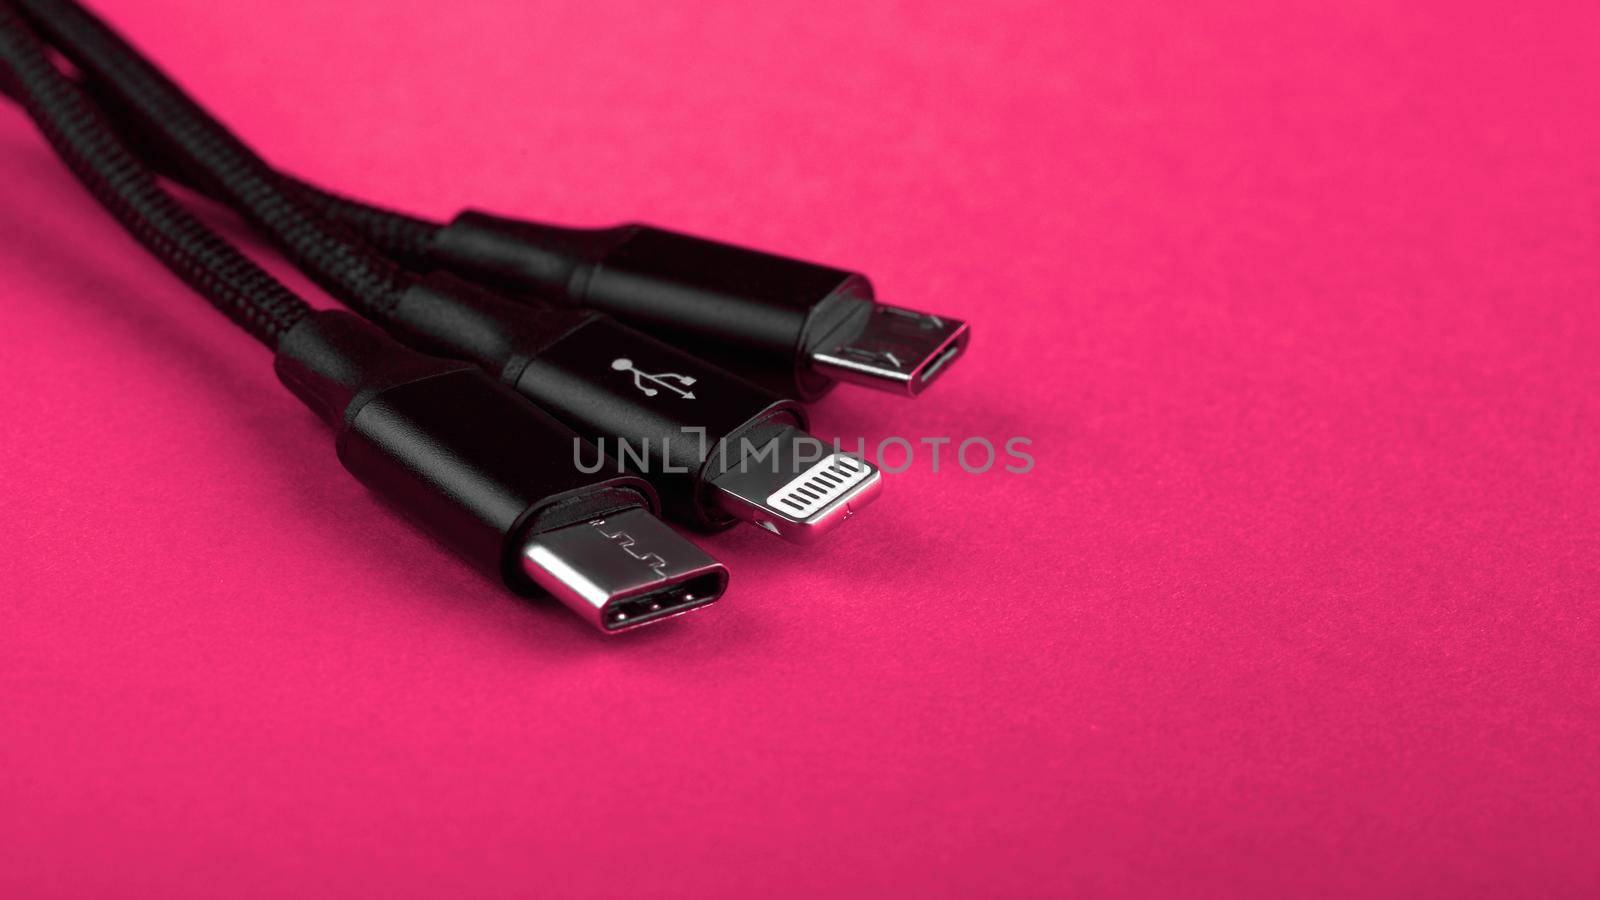 Closeup Shot of Universal USB Cable. 3 different cellphone usb charging plugs adapter from USB by EvgeniyQW